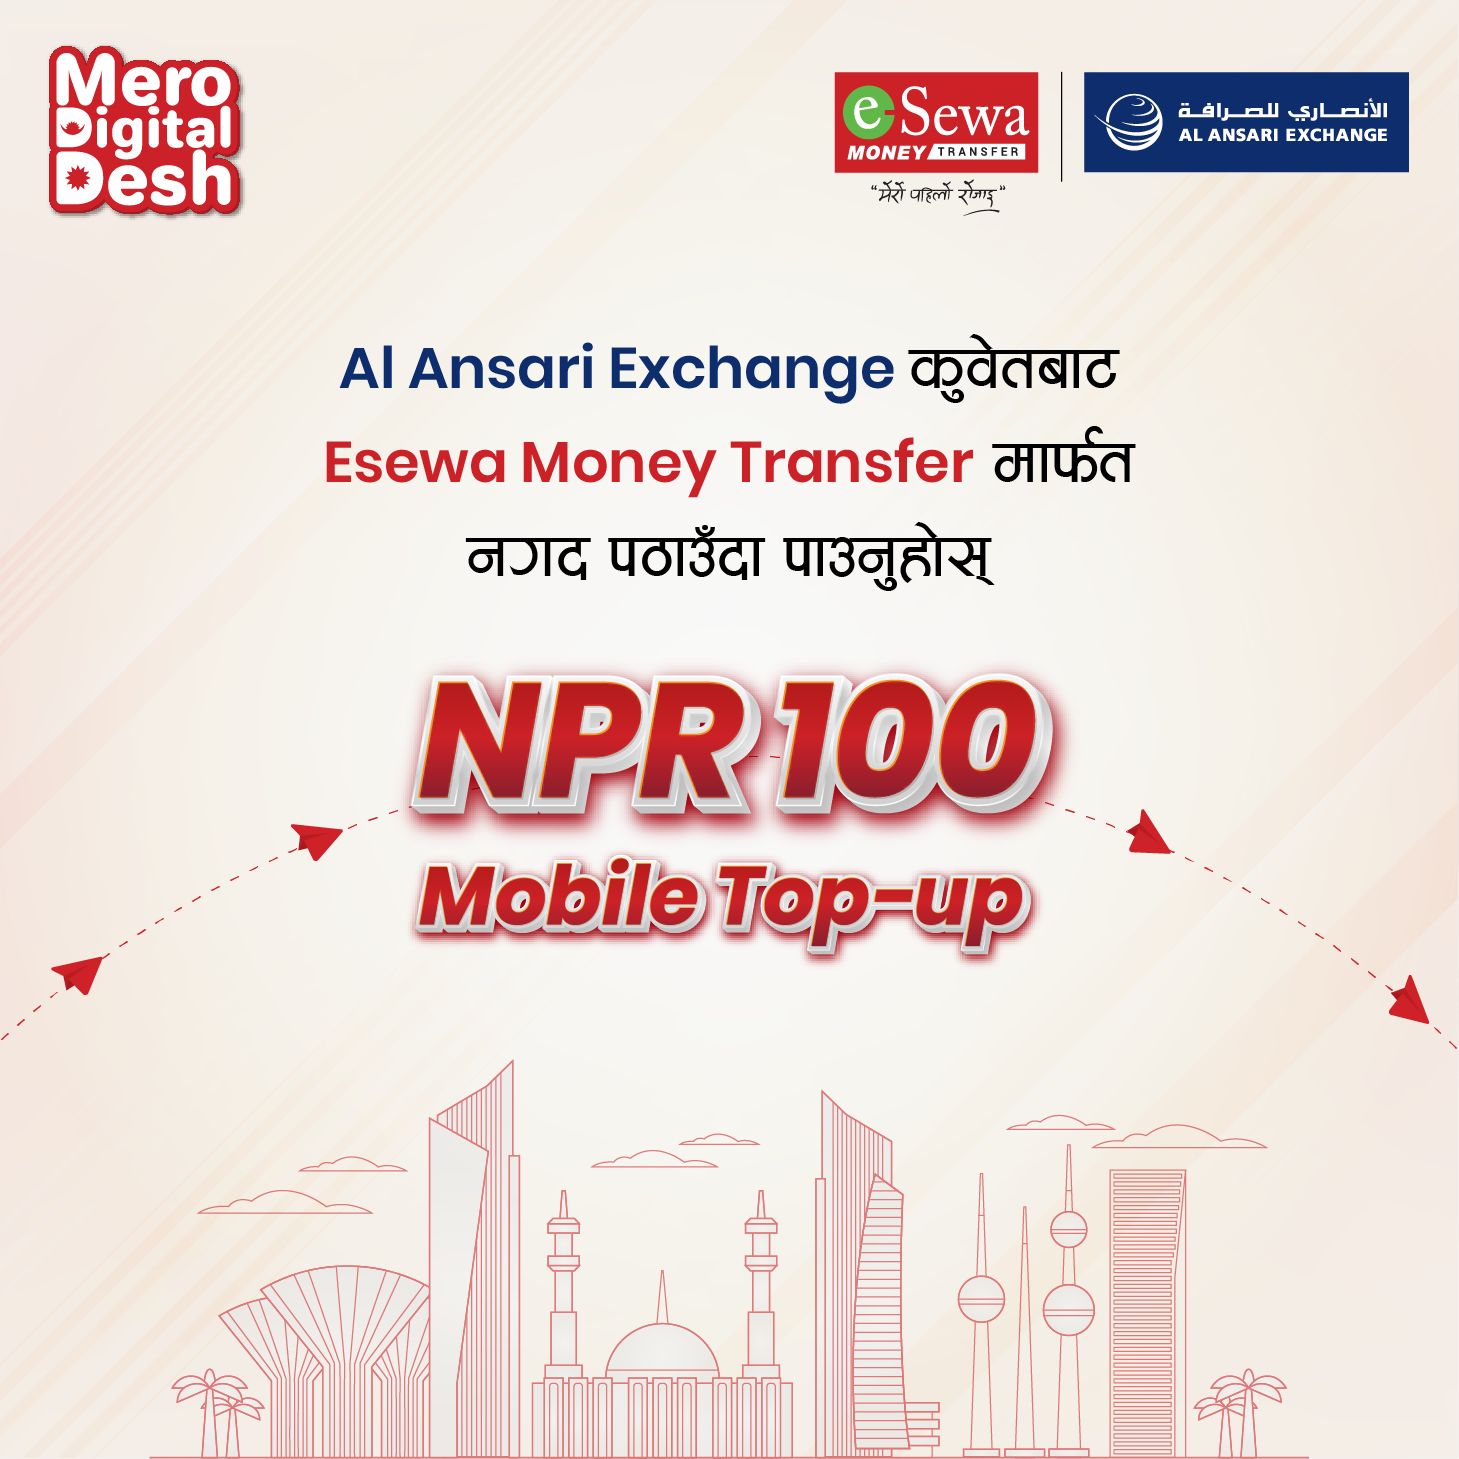 Enjoy Rs. 100 Mobile Top-up with Esewa Money Transfer and Al Ansari Exchange ! - Featured Image